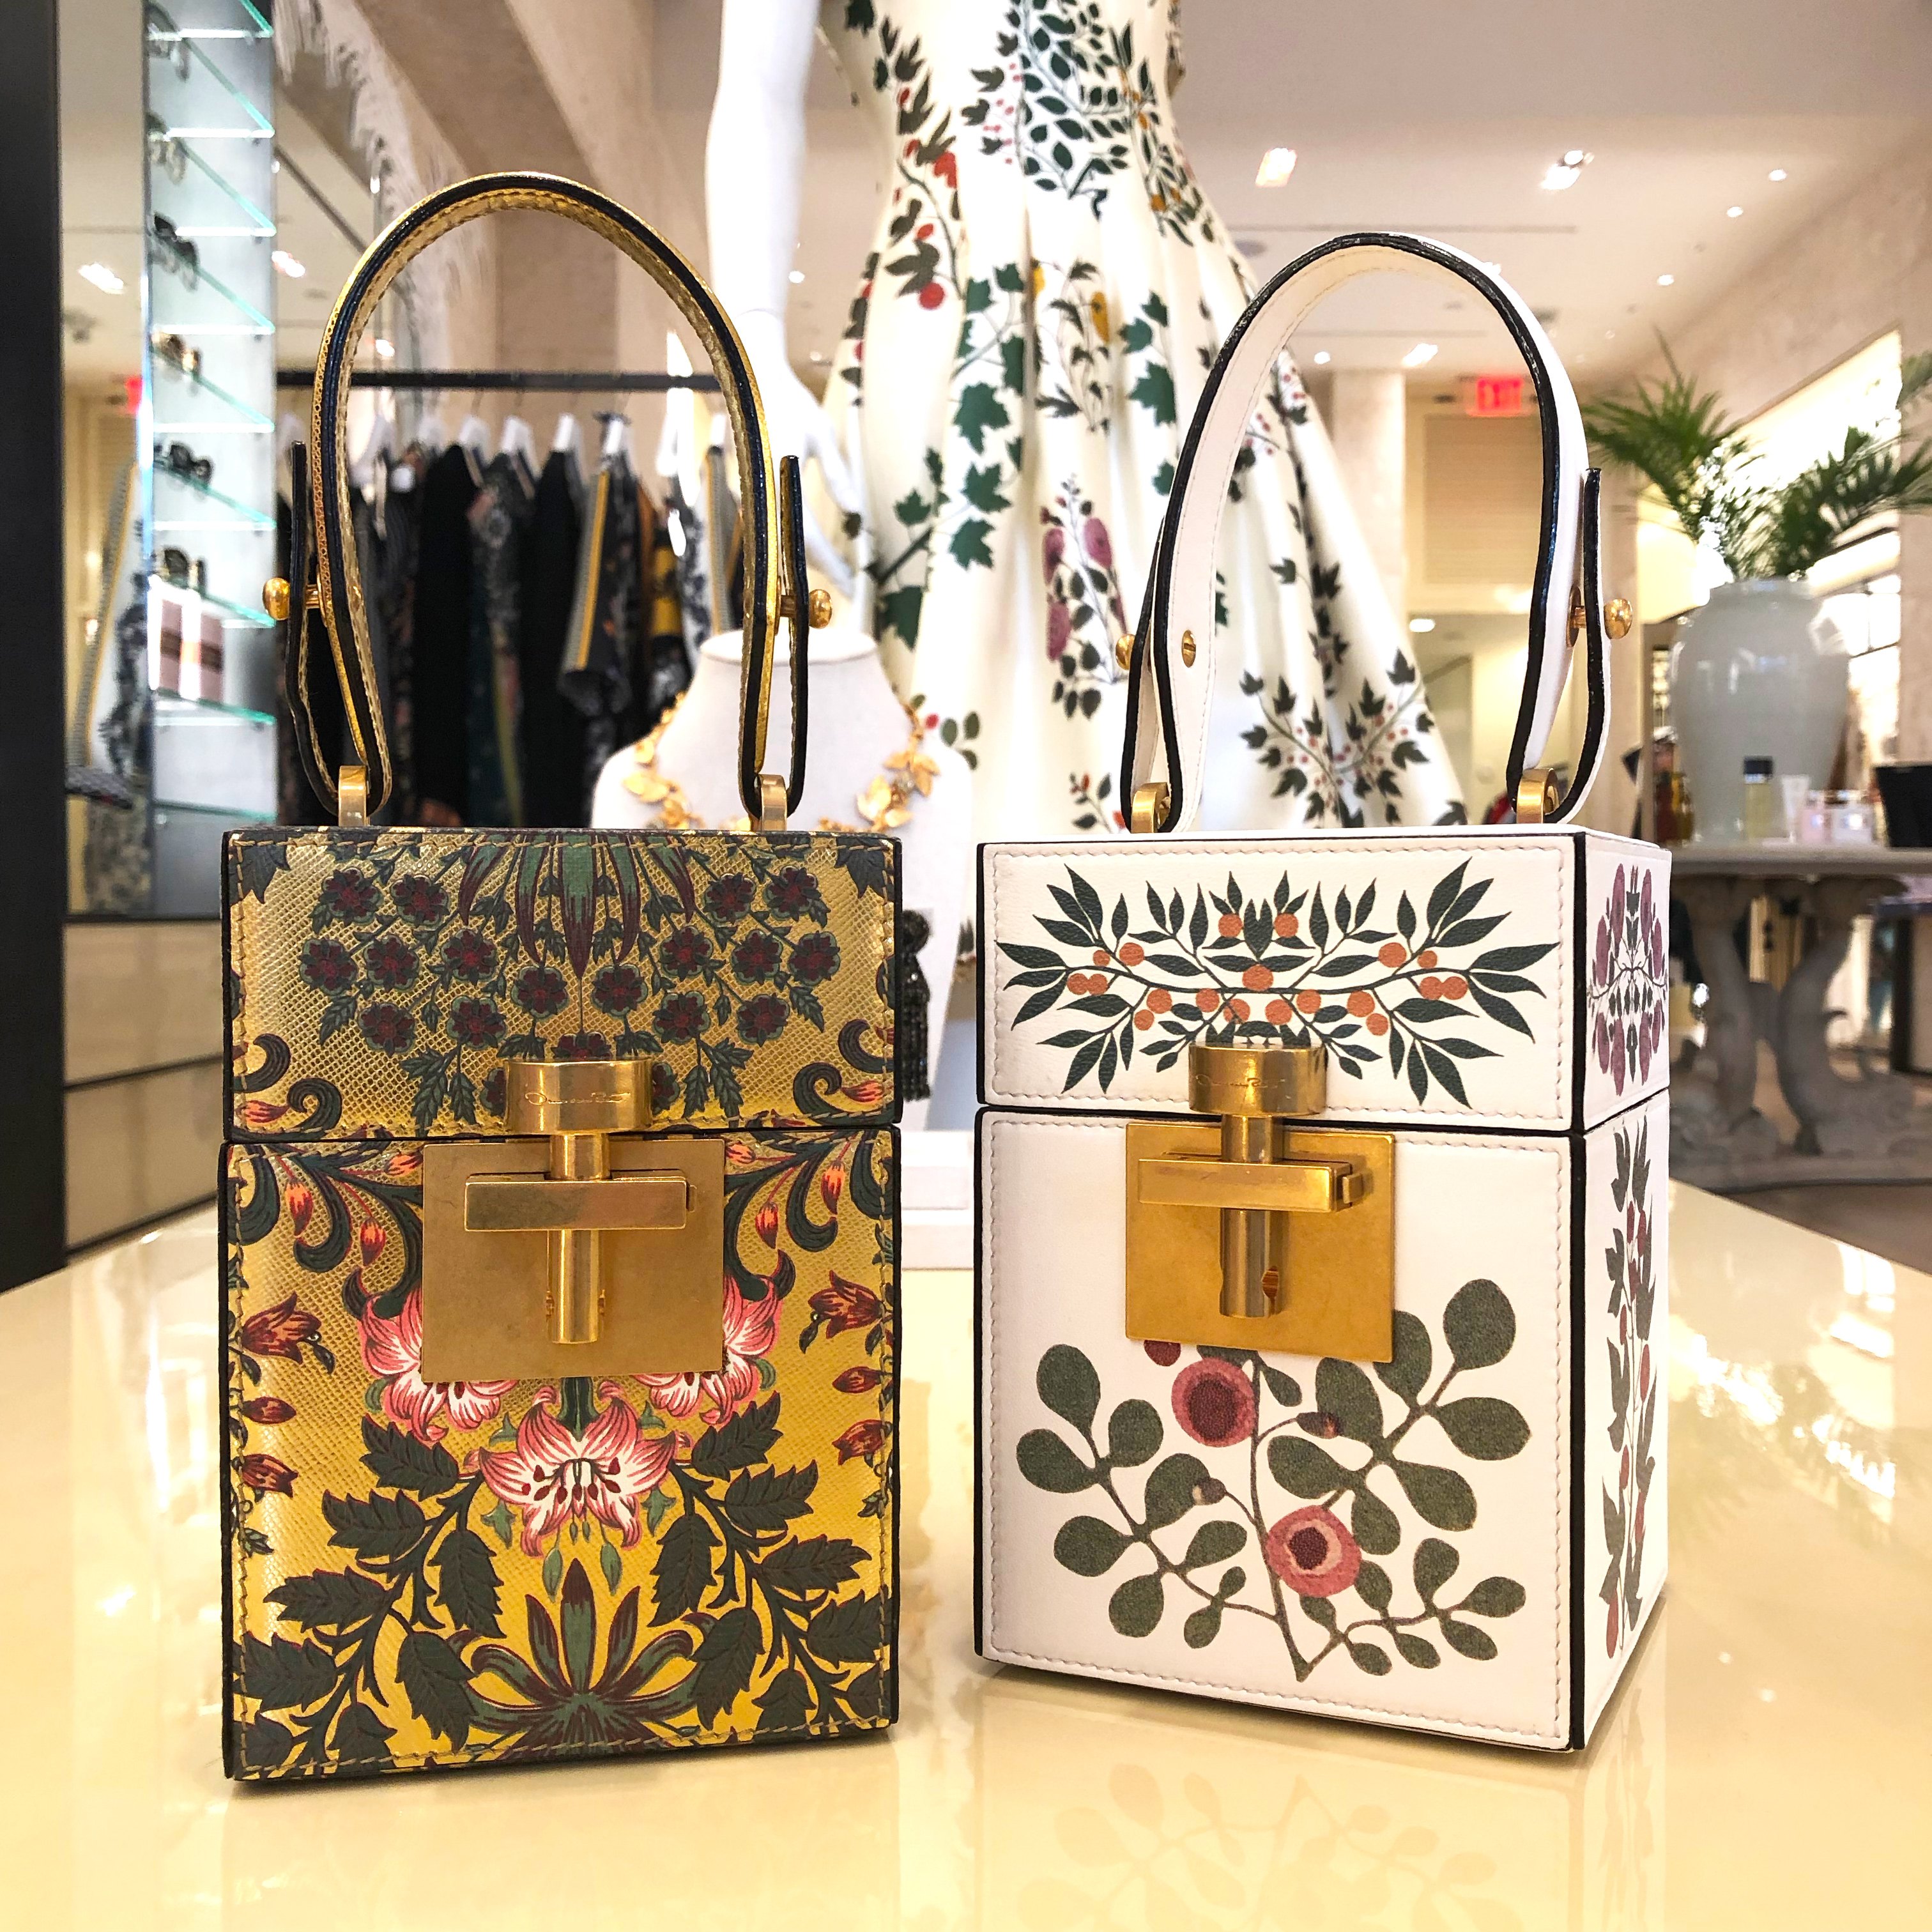 Oscar de la Renta Mini Alibi Bag inspired by vintage travel trunks, the Alibi bag is crafted from printed gold leather and printed shell leather with a lock clasp and a tonal top handle